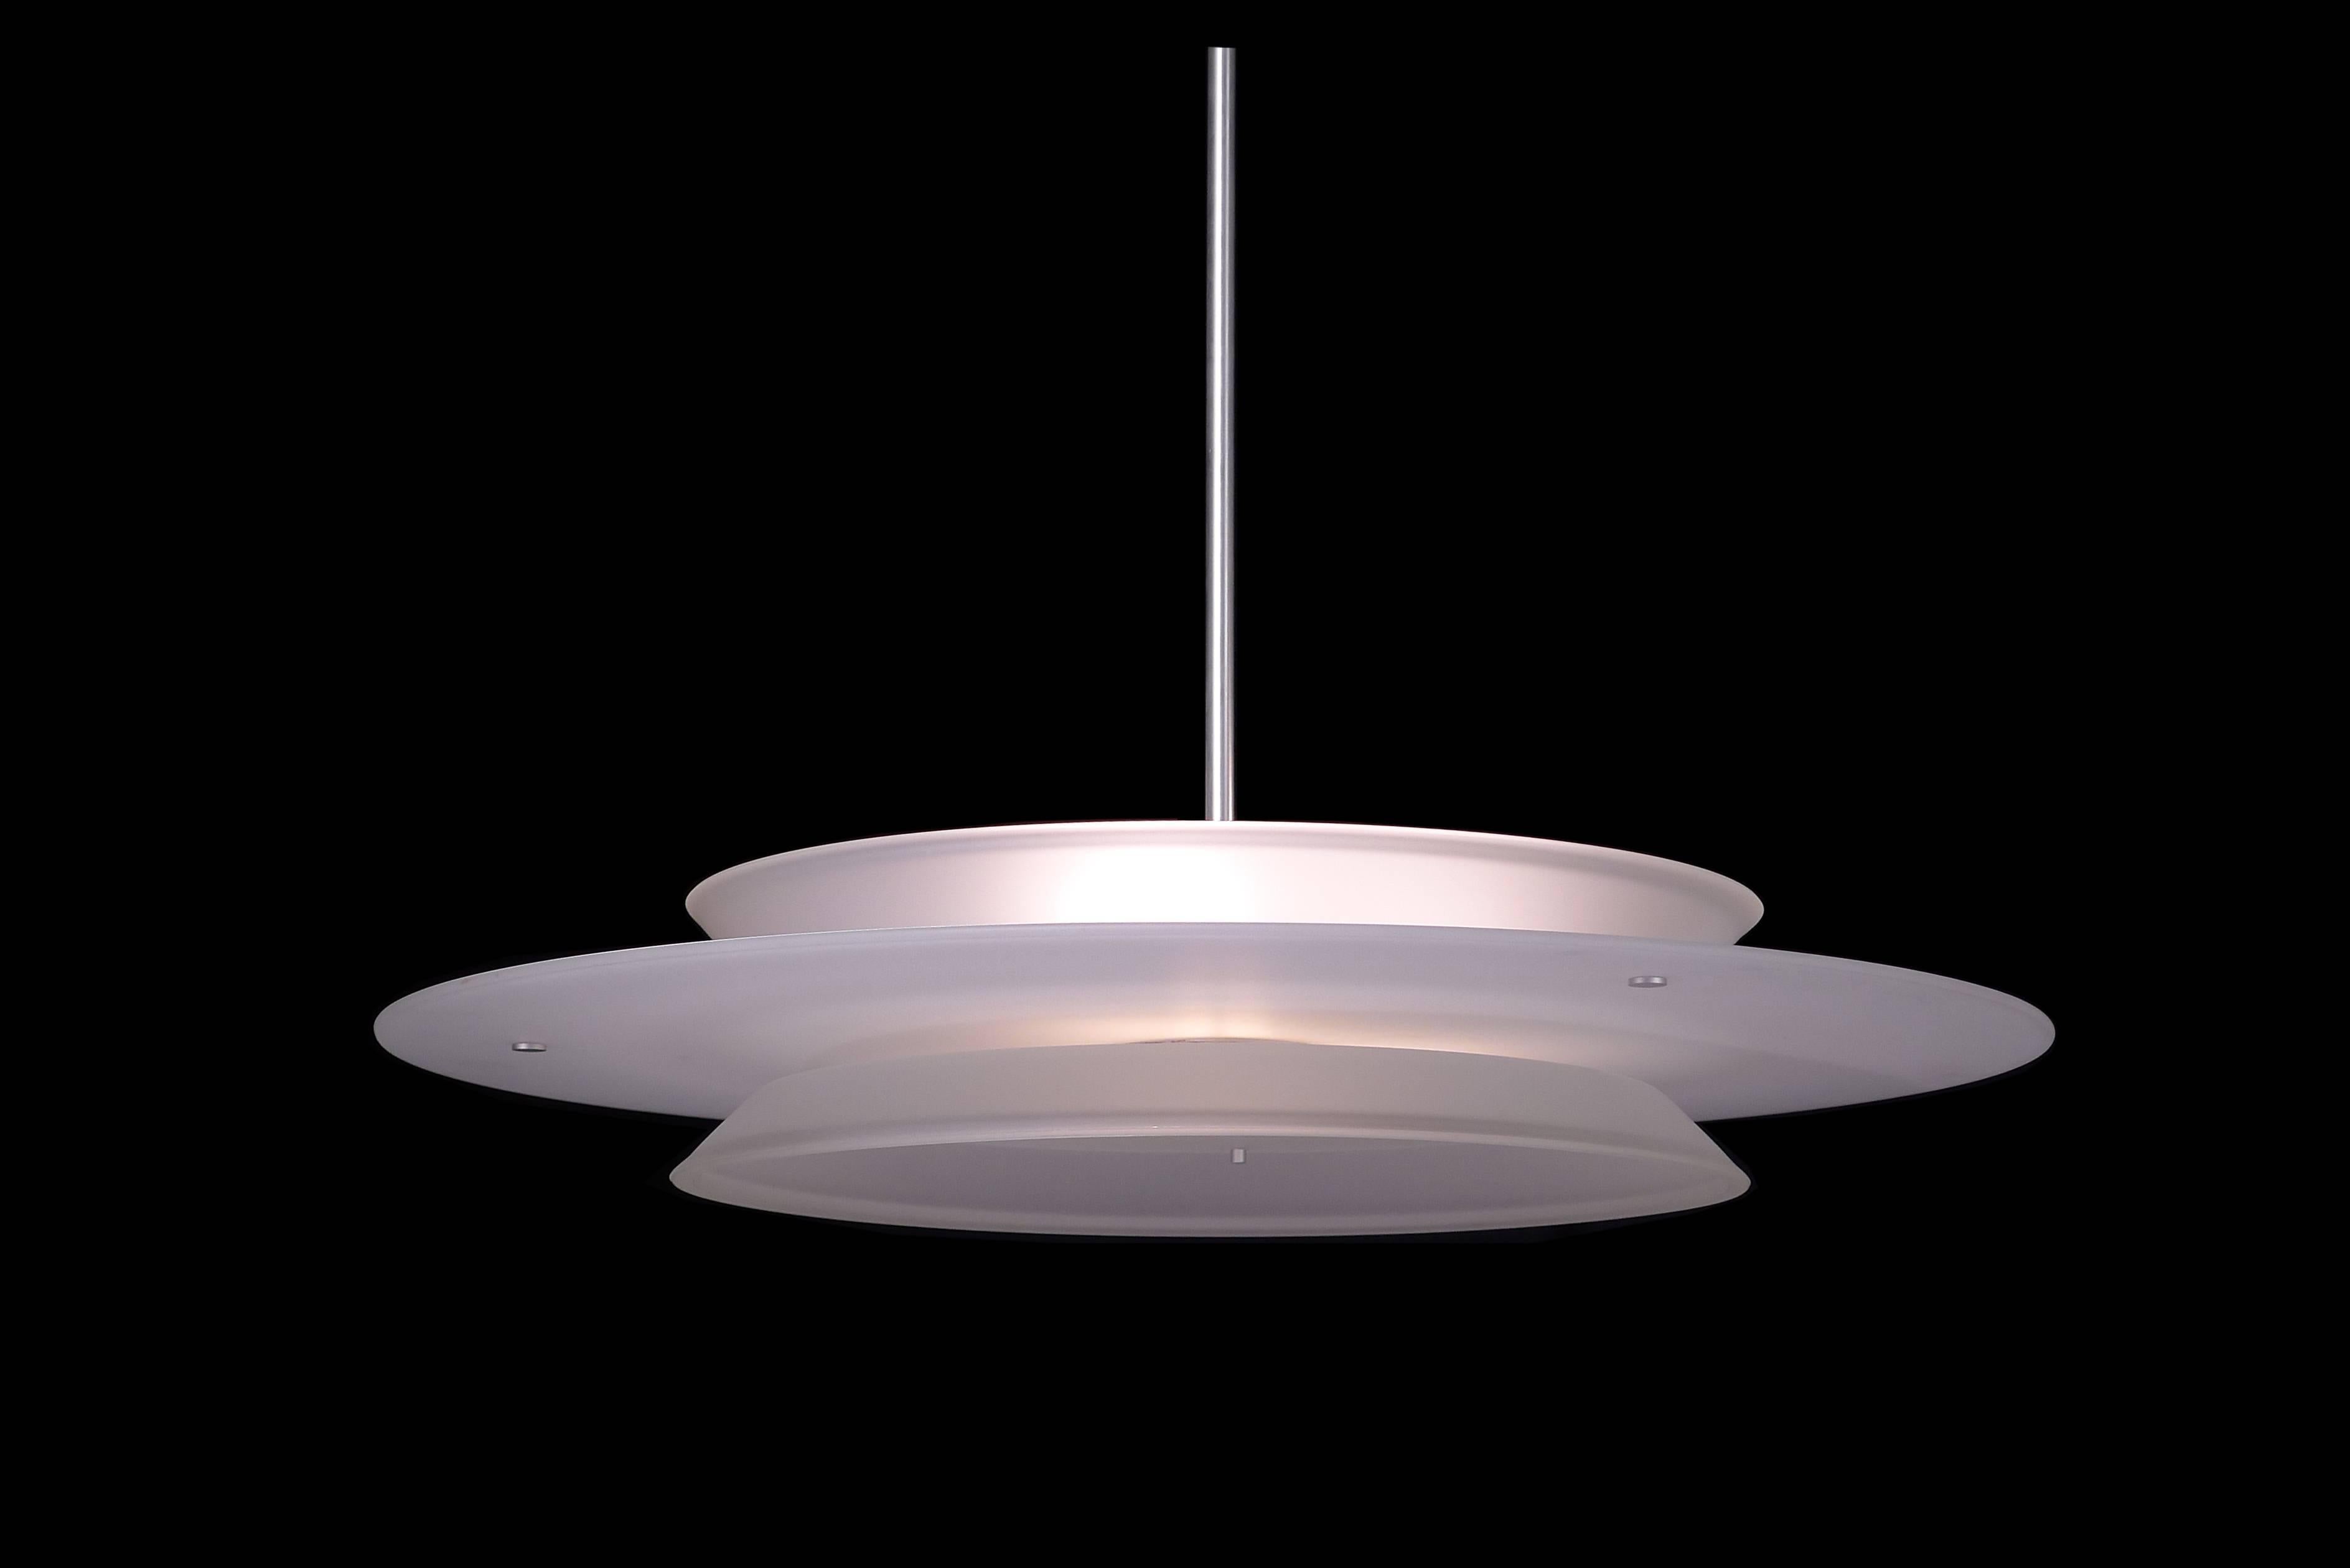 3' diameter spaceship pendant with white glass center disk with tapered clear frosted glass top and bottom. Metalwork is brushed aluminum.  Designed by Architect, Sandy Littman.

Architect, Sandy Littman of Duesenberg LTD.  and The American Glass